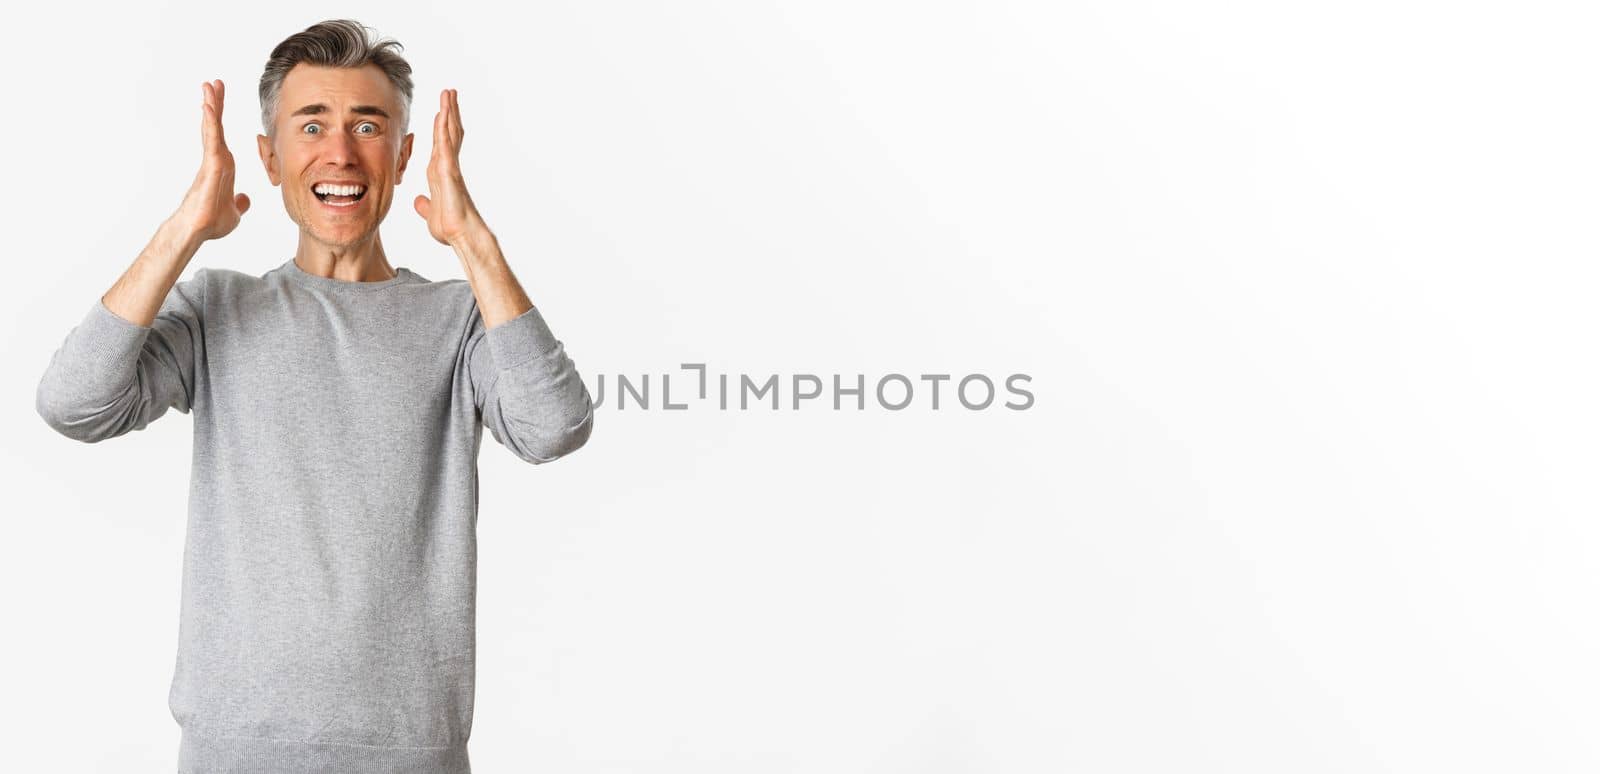 Image of frustrated middle-aged guy in grey sweater panicking, shaking hands and looking distressed, standing over white background.